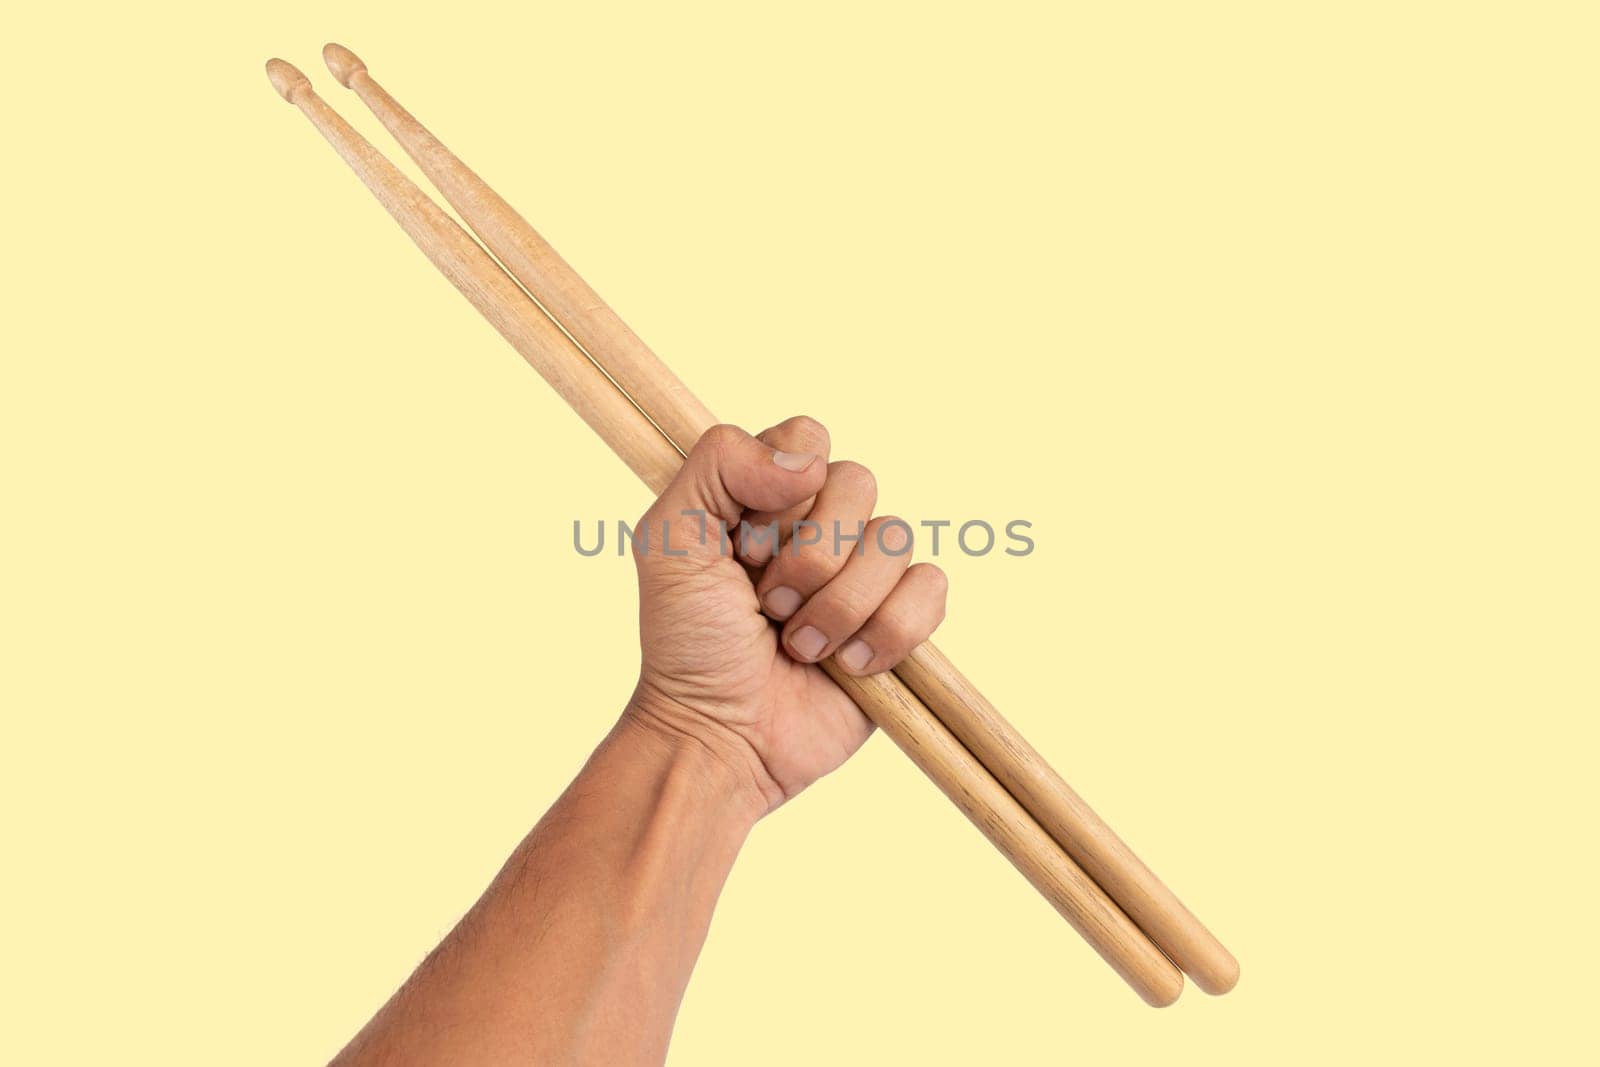 Black male hand holding wooden Drum sticks isolated on yellow background by TropicalNinjaStudio